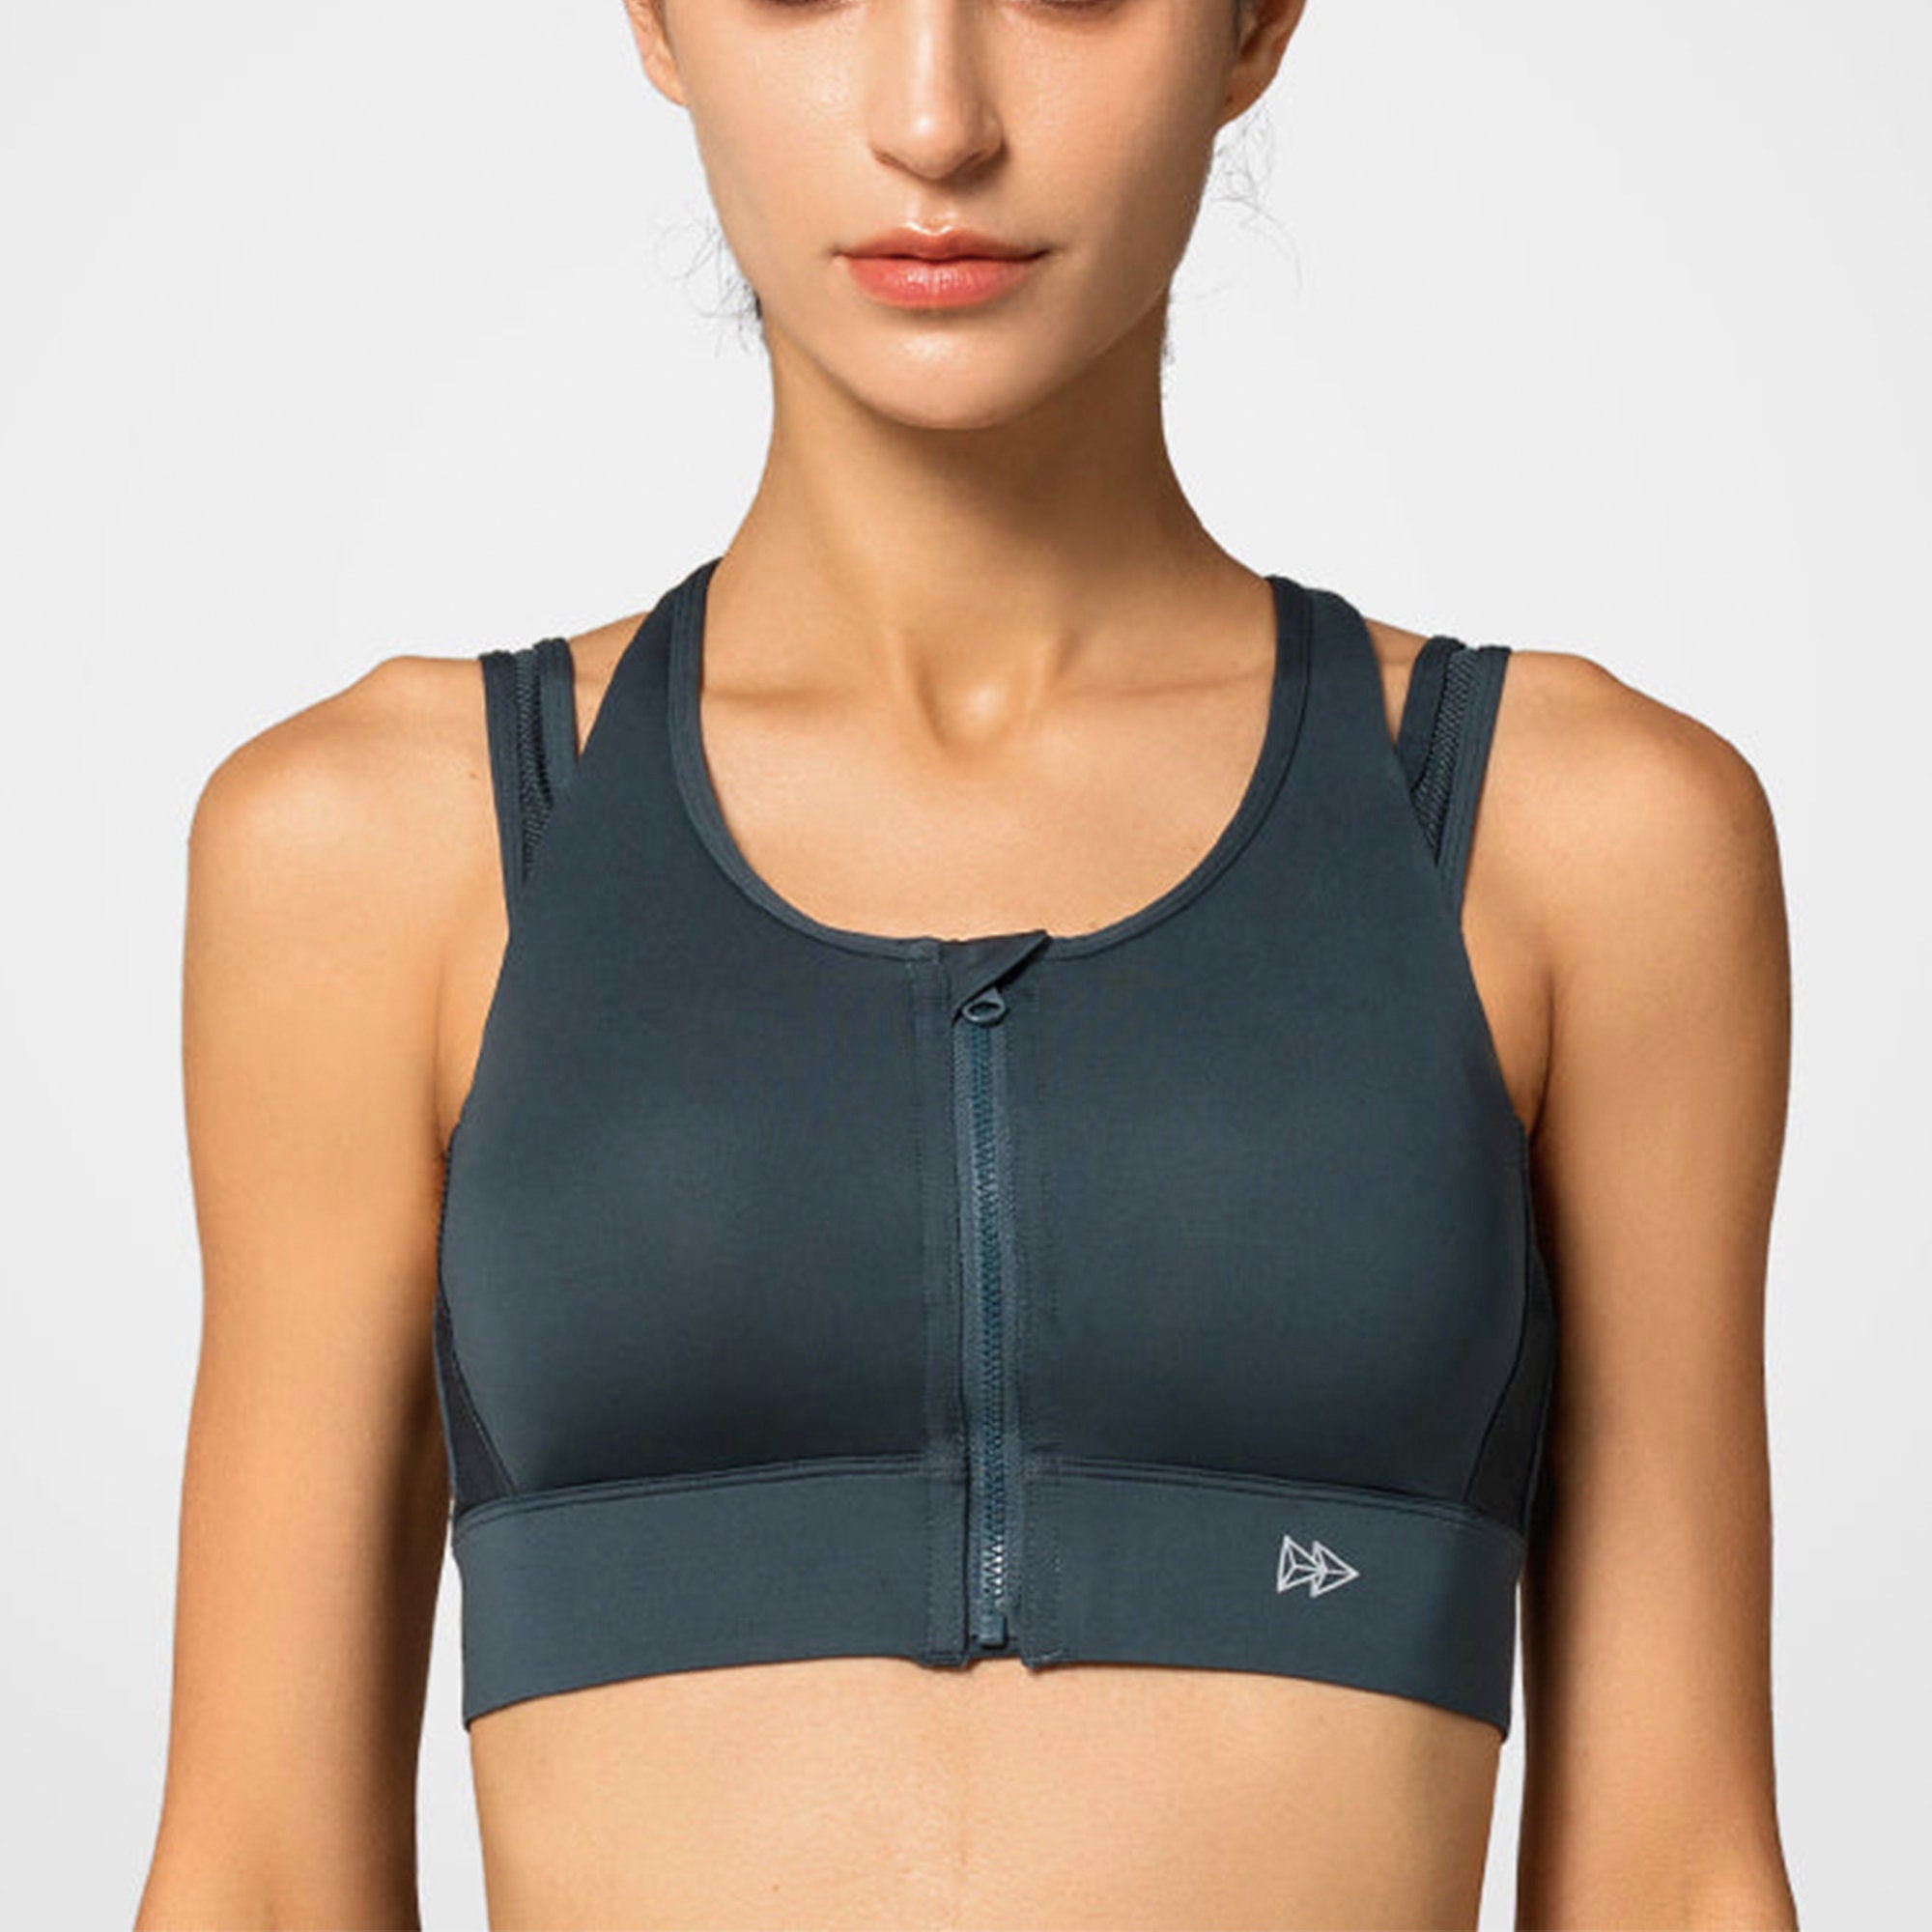 Buy High Impact Sports Bra Non-removable Molded Cups Shift Zip Front  Racerback Padded Running Bra Online in India 